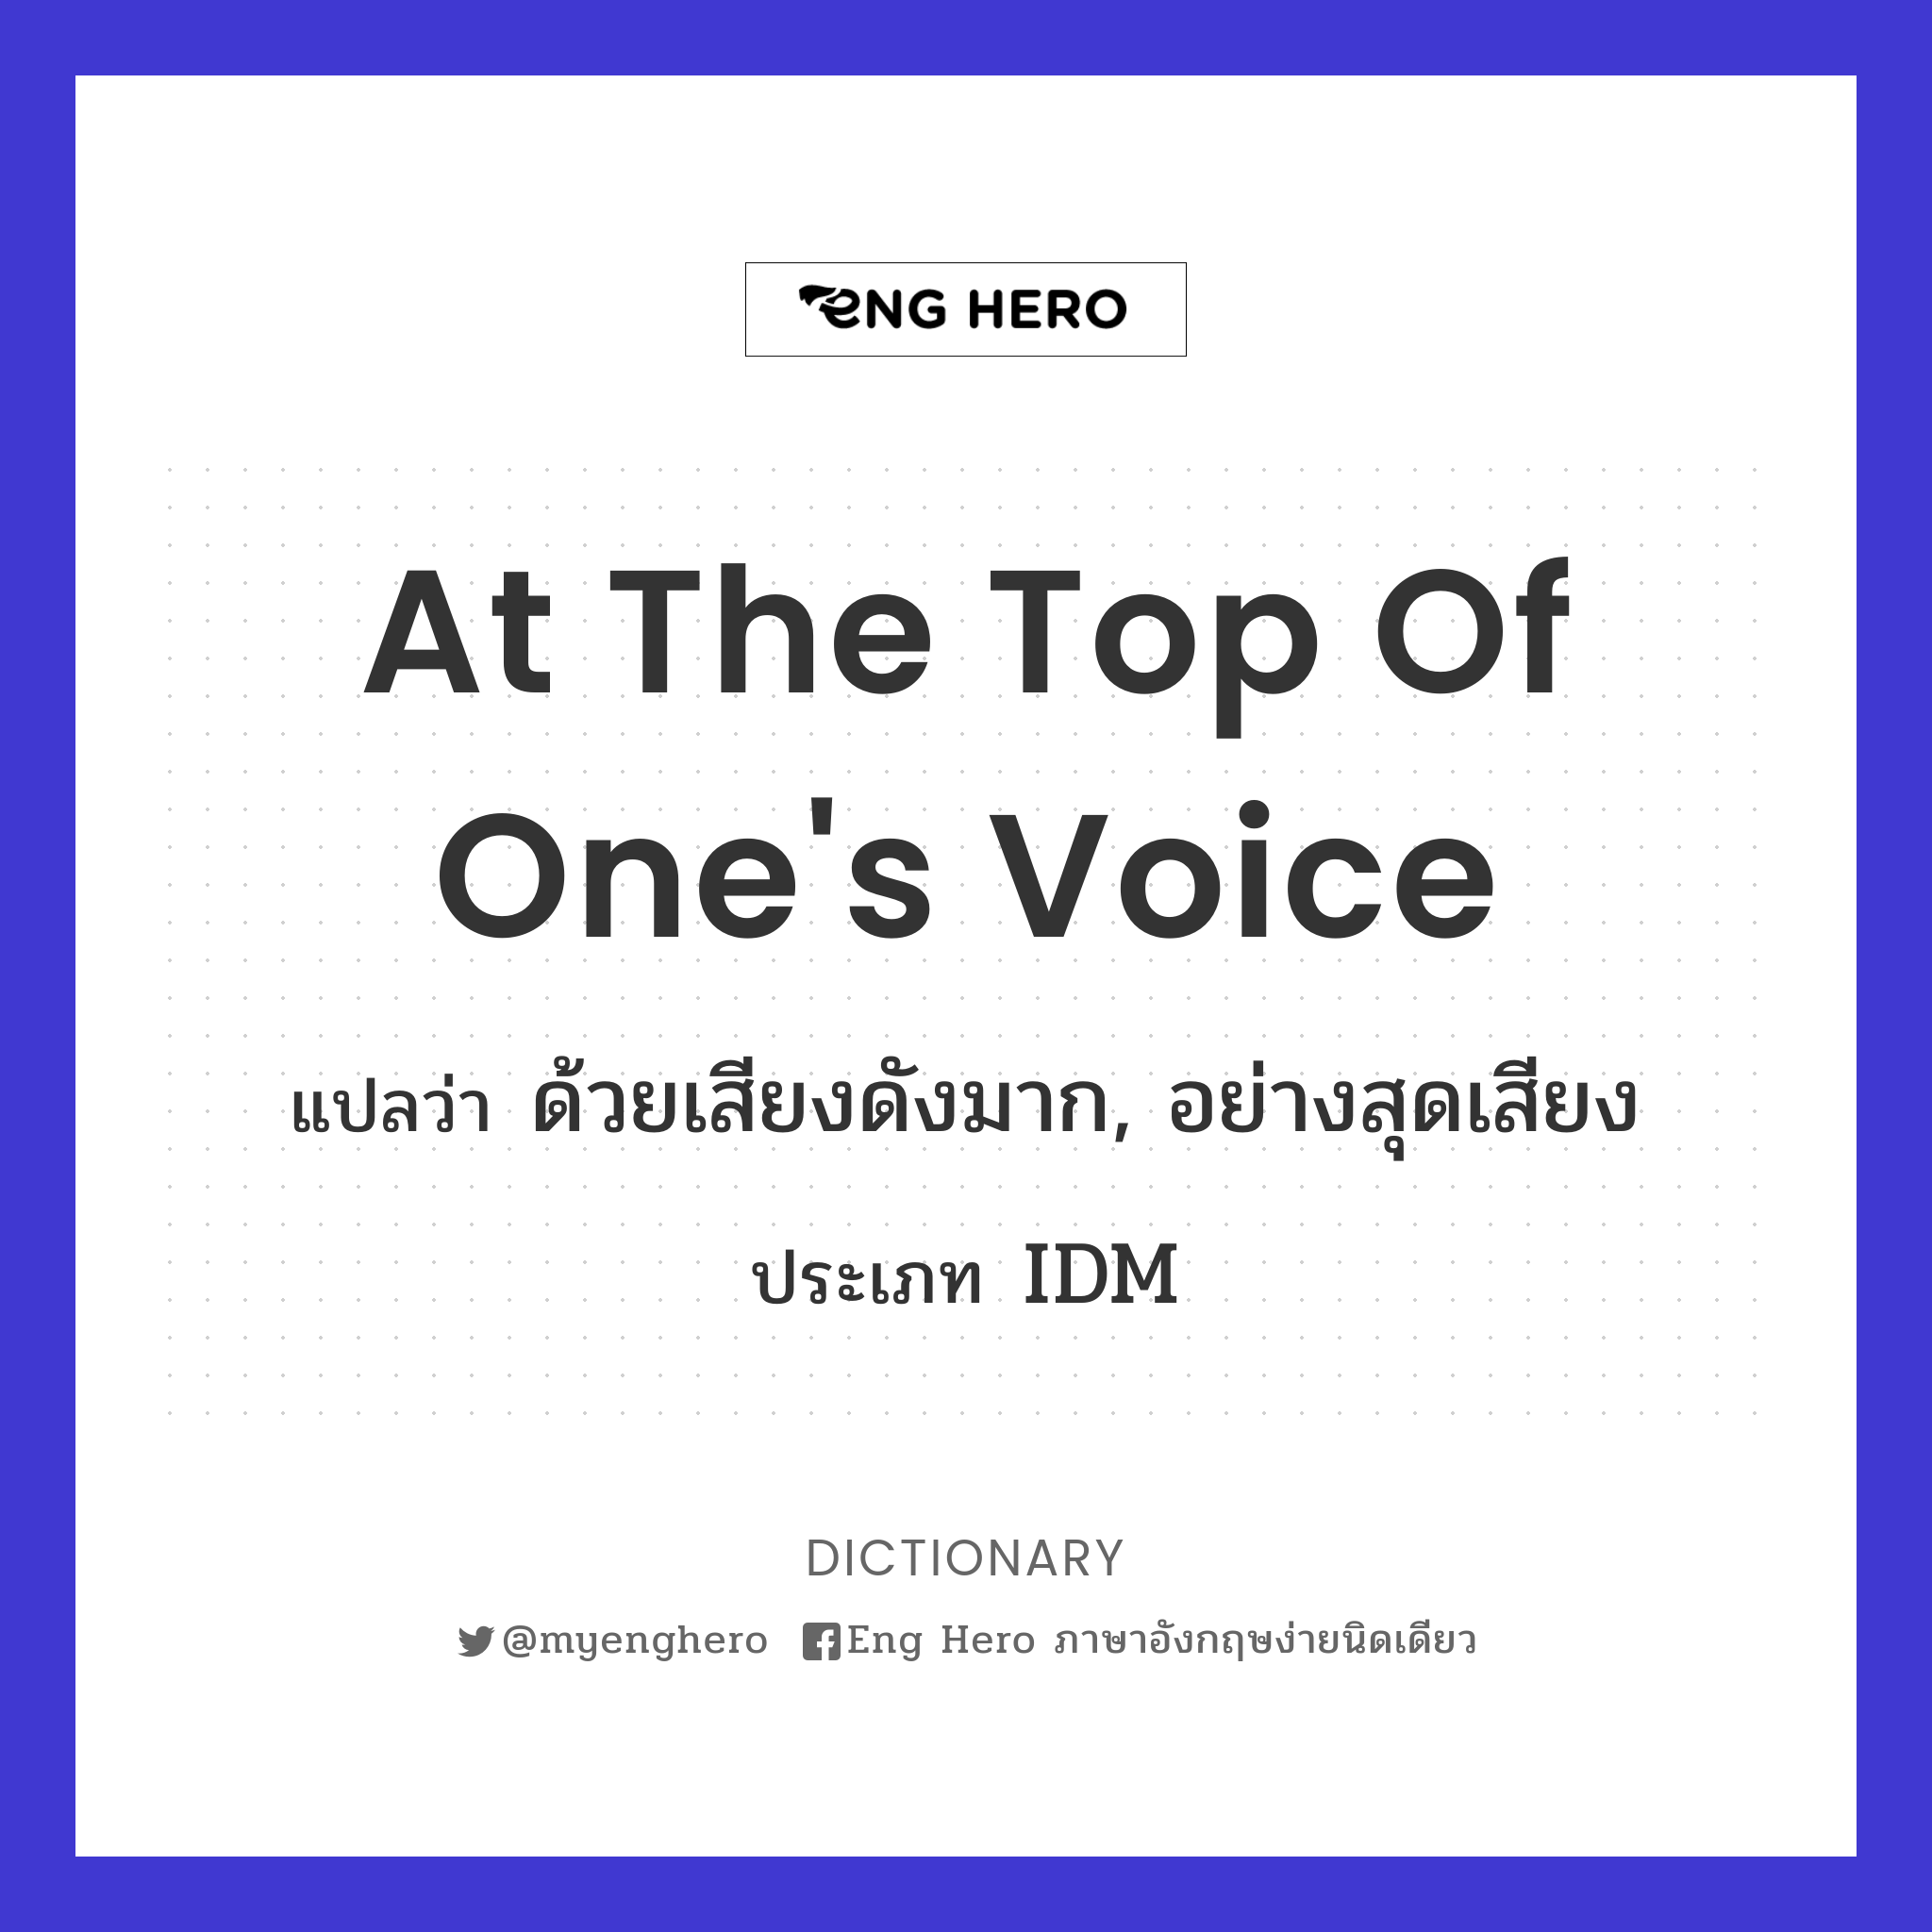 at the top of one's voice